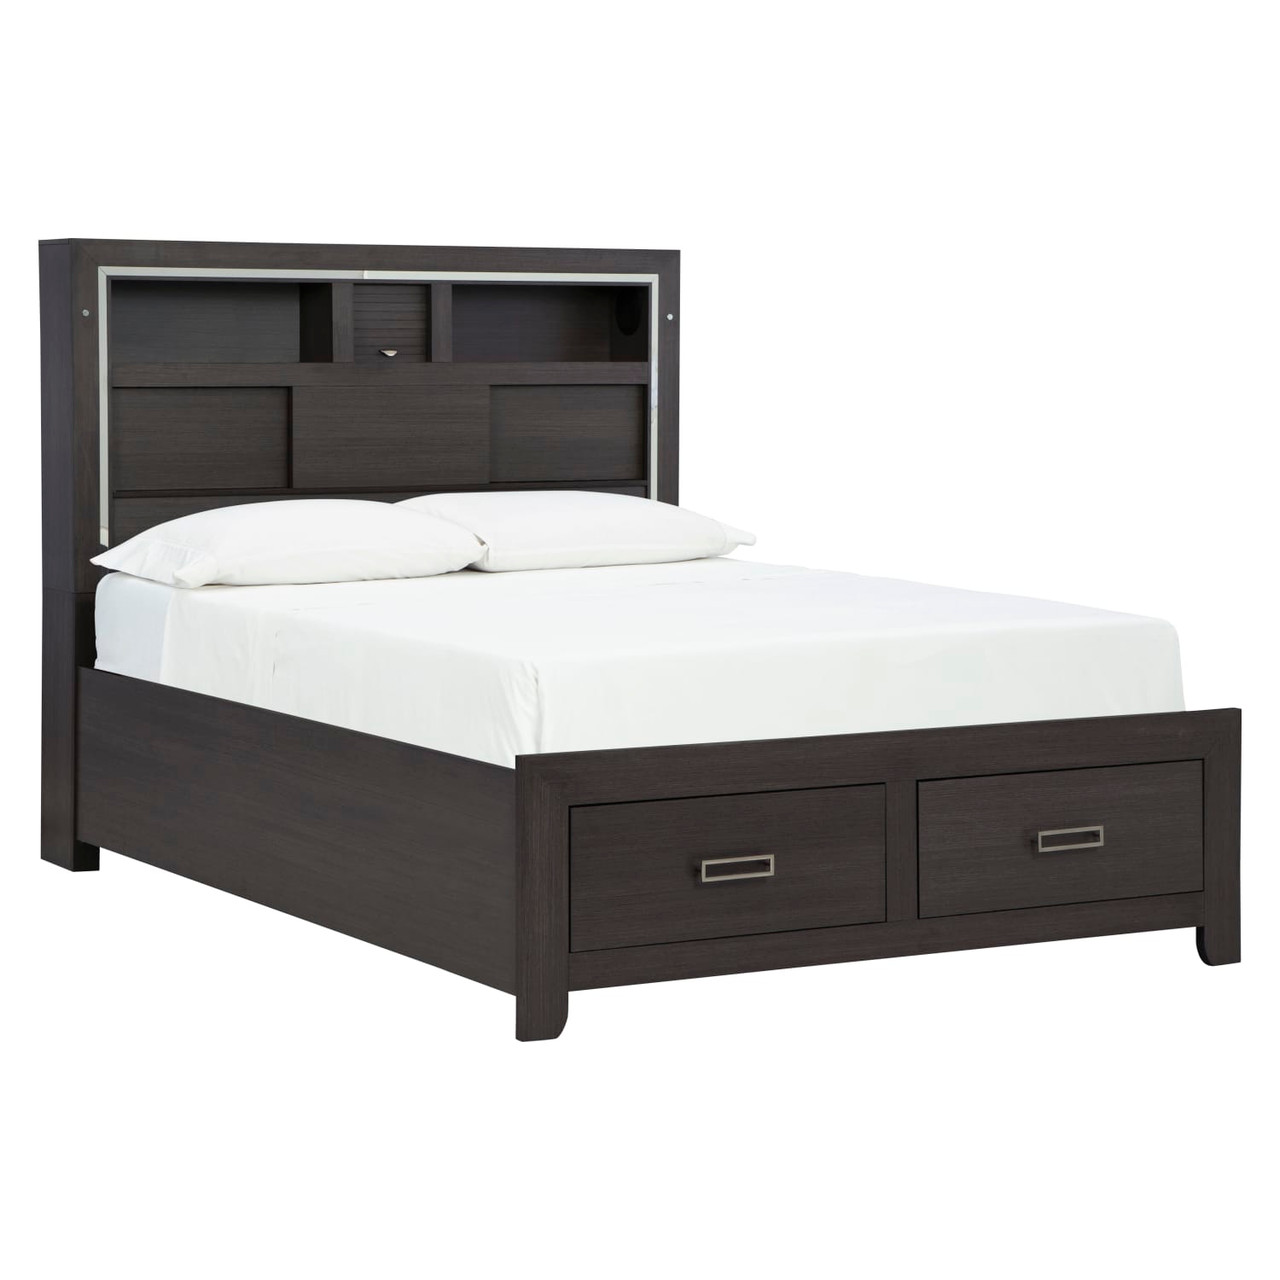 Rhapsody Collection Gray King Bed